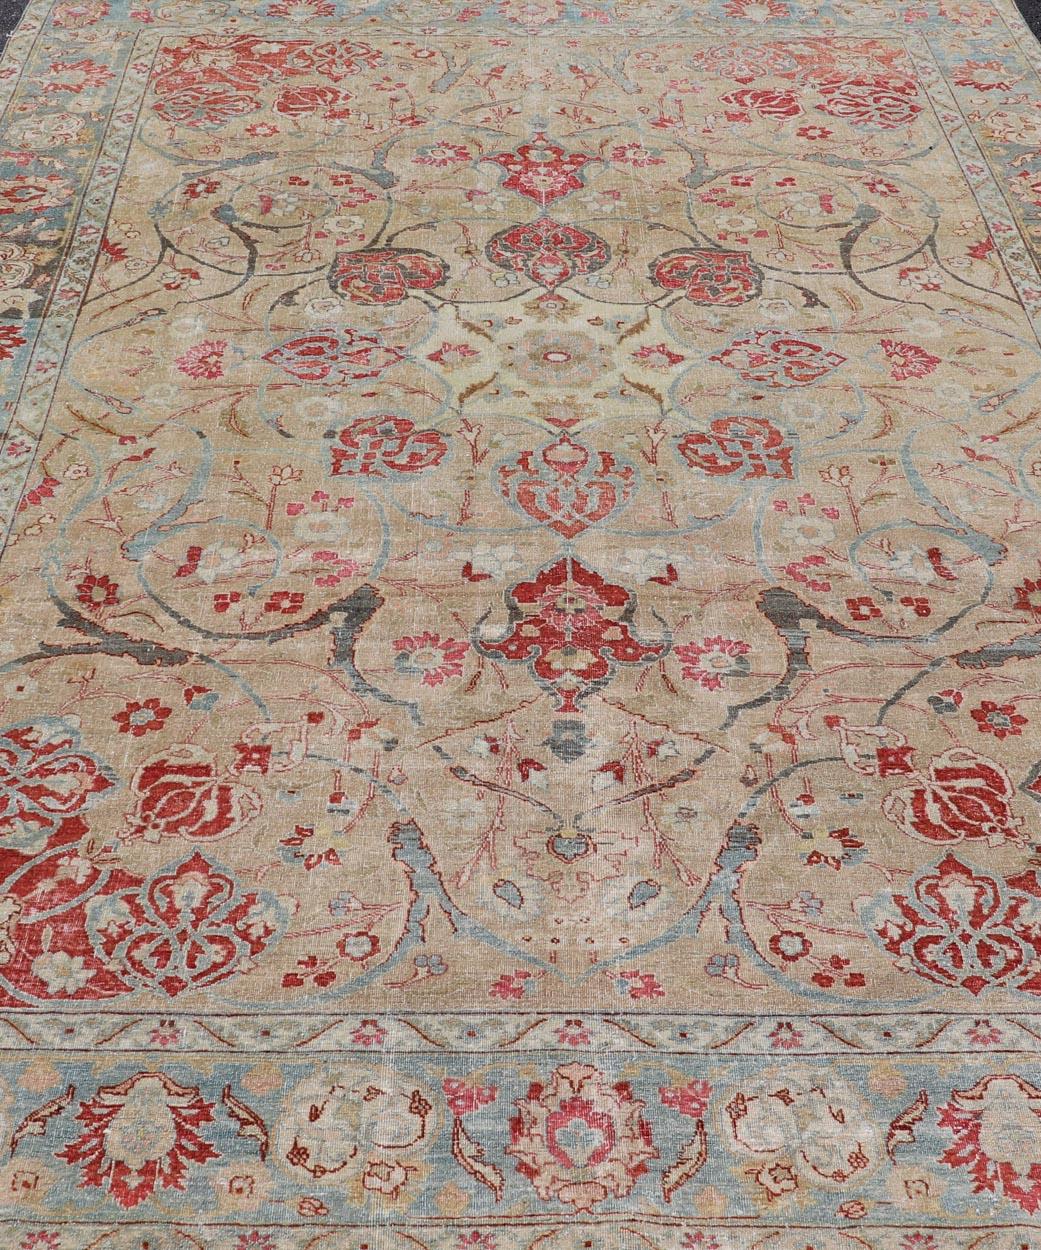 Antique Persian Tabriz Rug with Floral Medallion Design in Tan, Red, and Blue For Sale 4